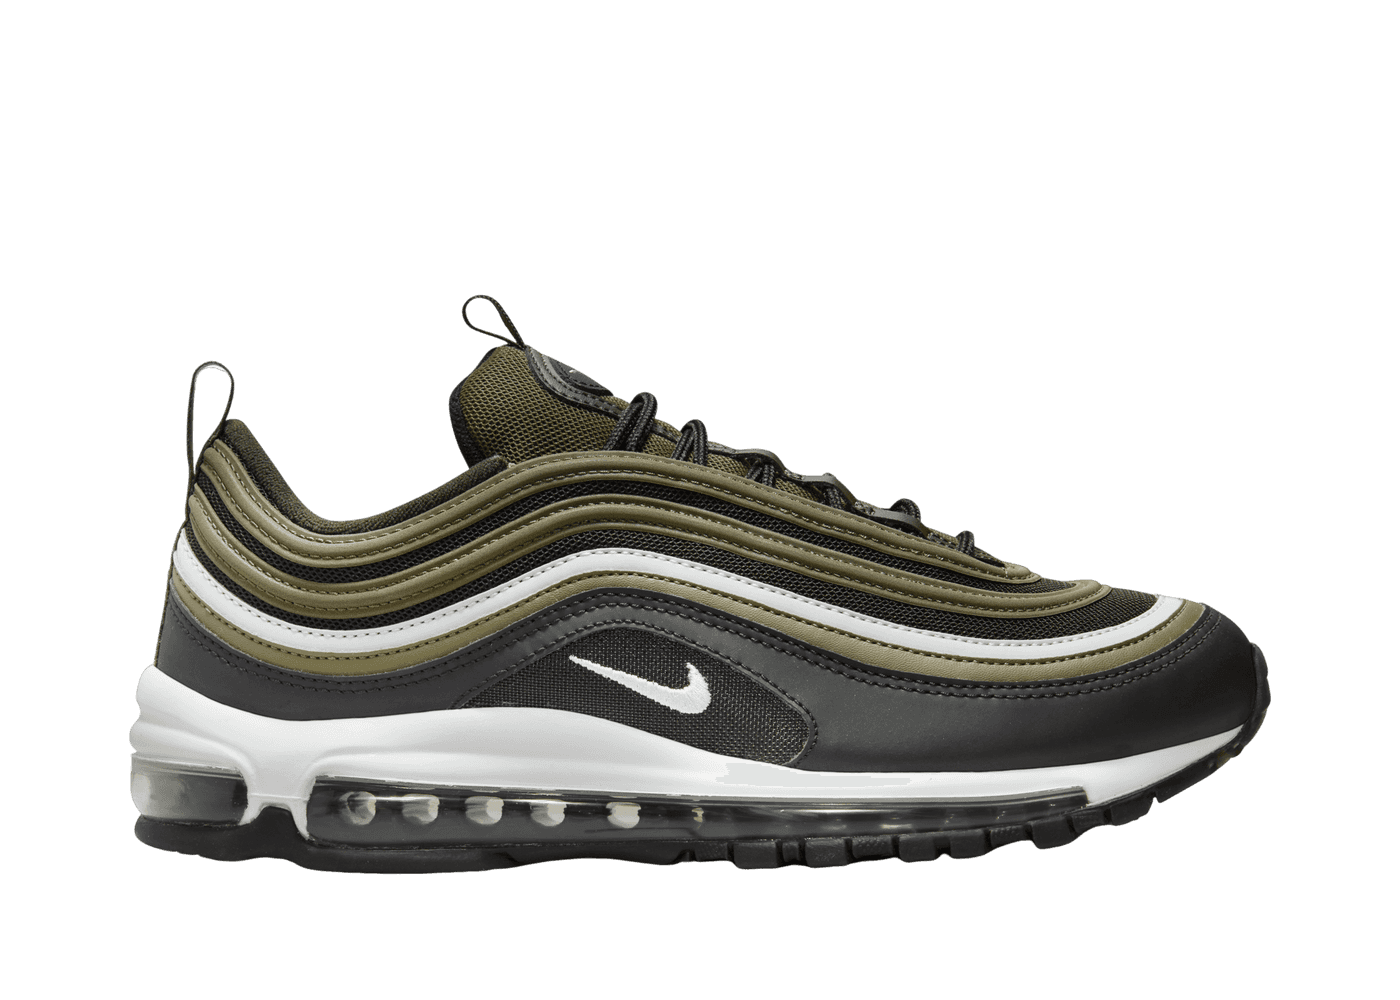 Nike Air Max 97 'Olive Sequoia' - 921826-202 Raffles and Release Date